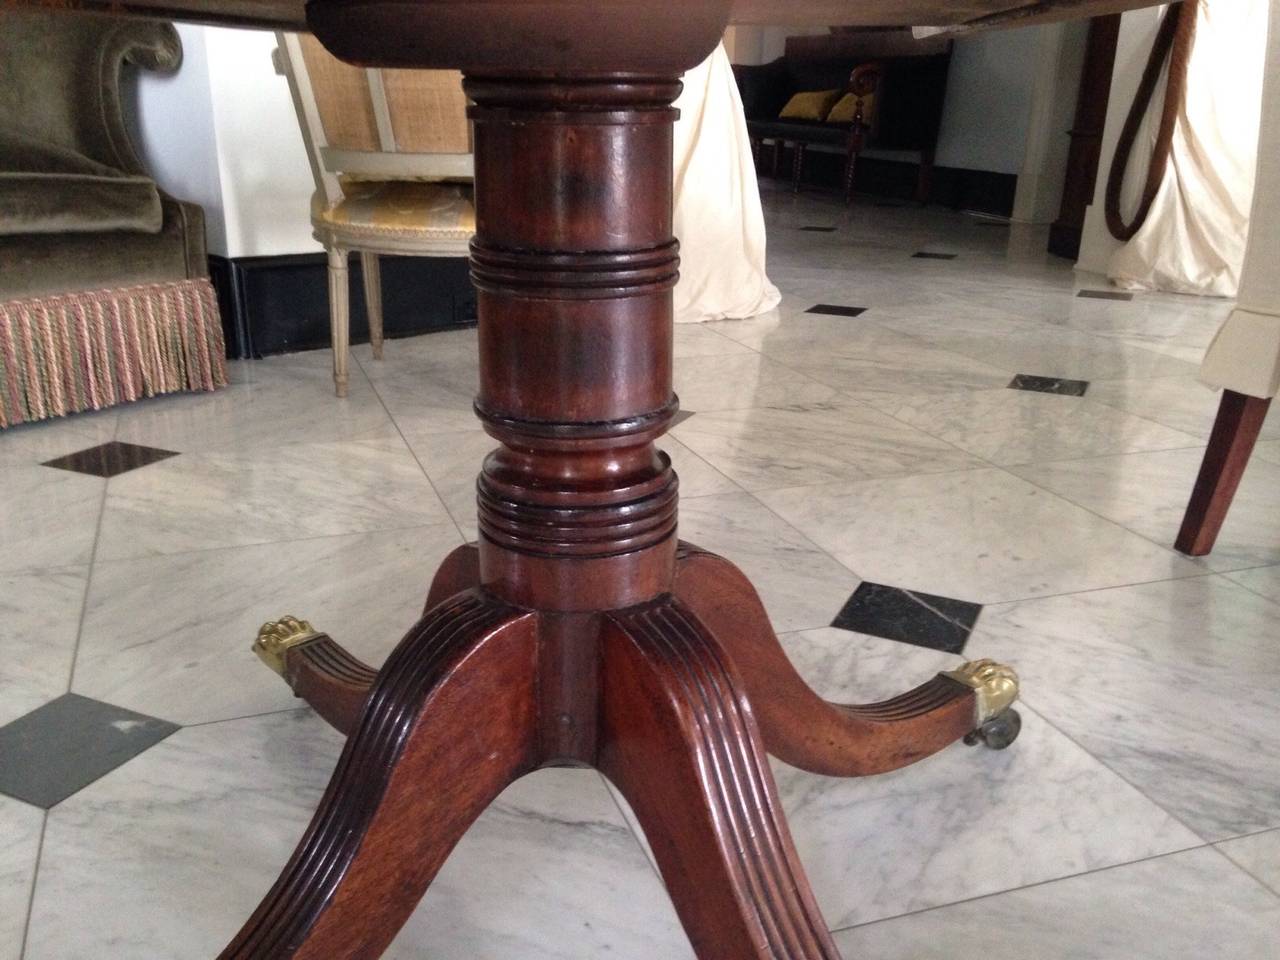 Georgian tilt-top mahogany breakfast or supper table, on tripod pedestal base, with brass lion's paw casters, inlay banding on top perimeter. Seats six comfortably. Will fold flat against wall (see photograph).